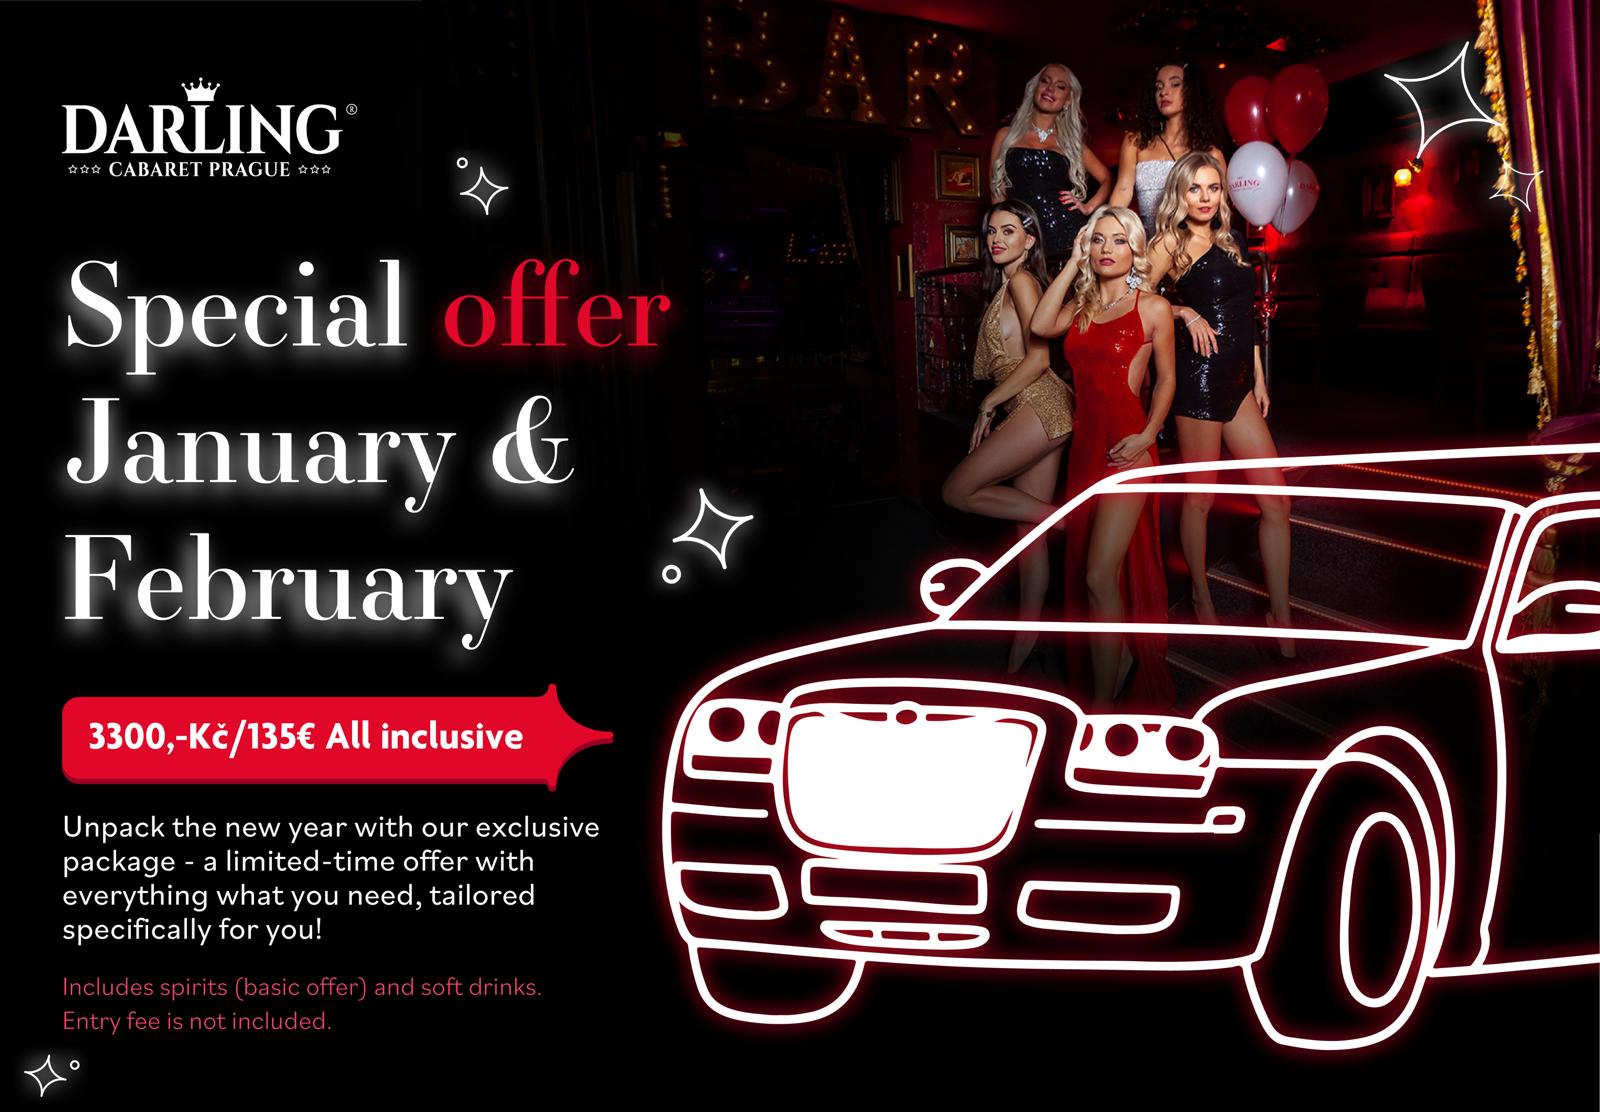 Special offer January & February